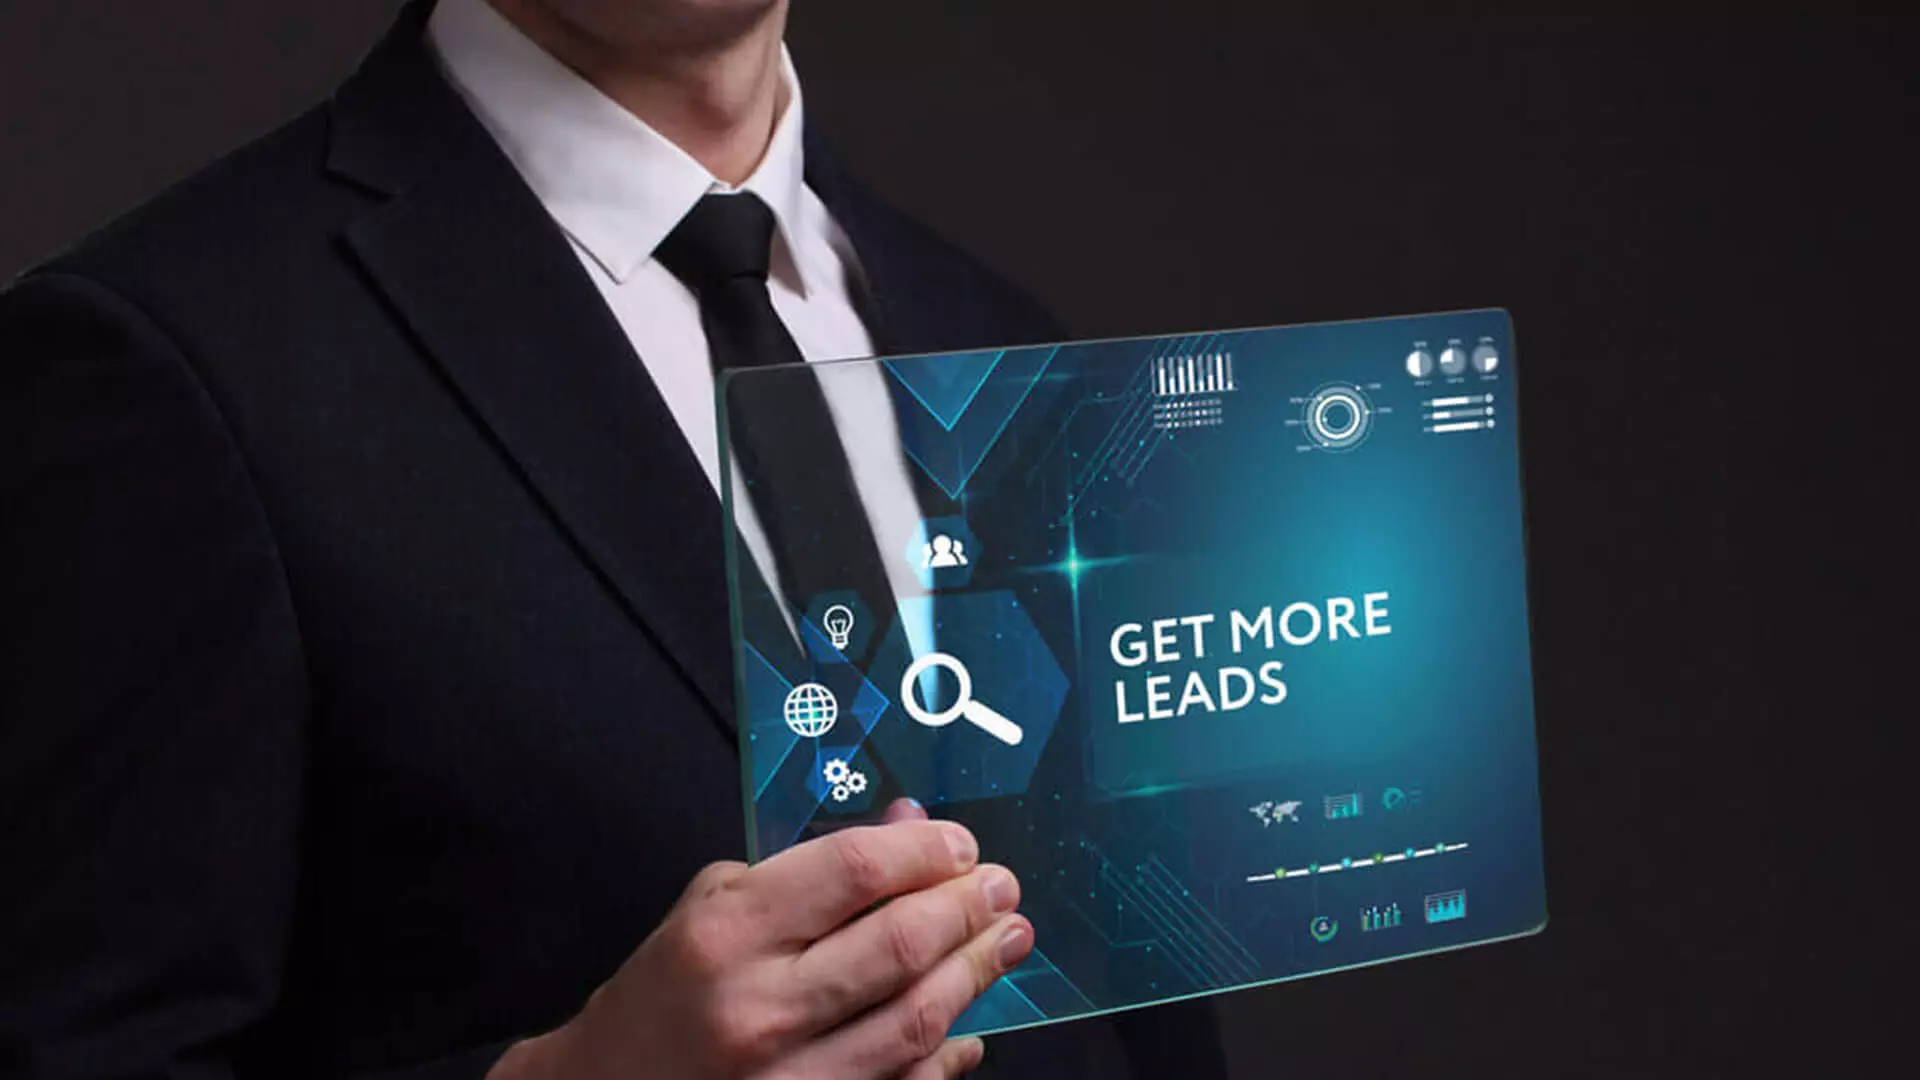 How to generate more leads